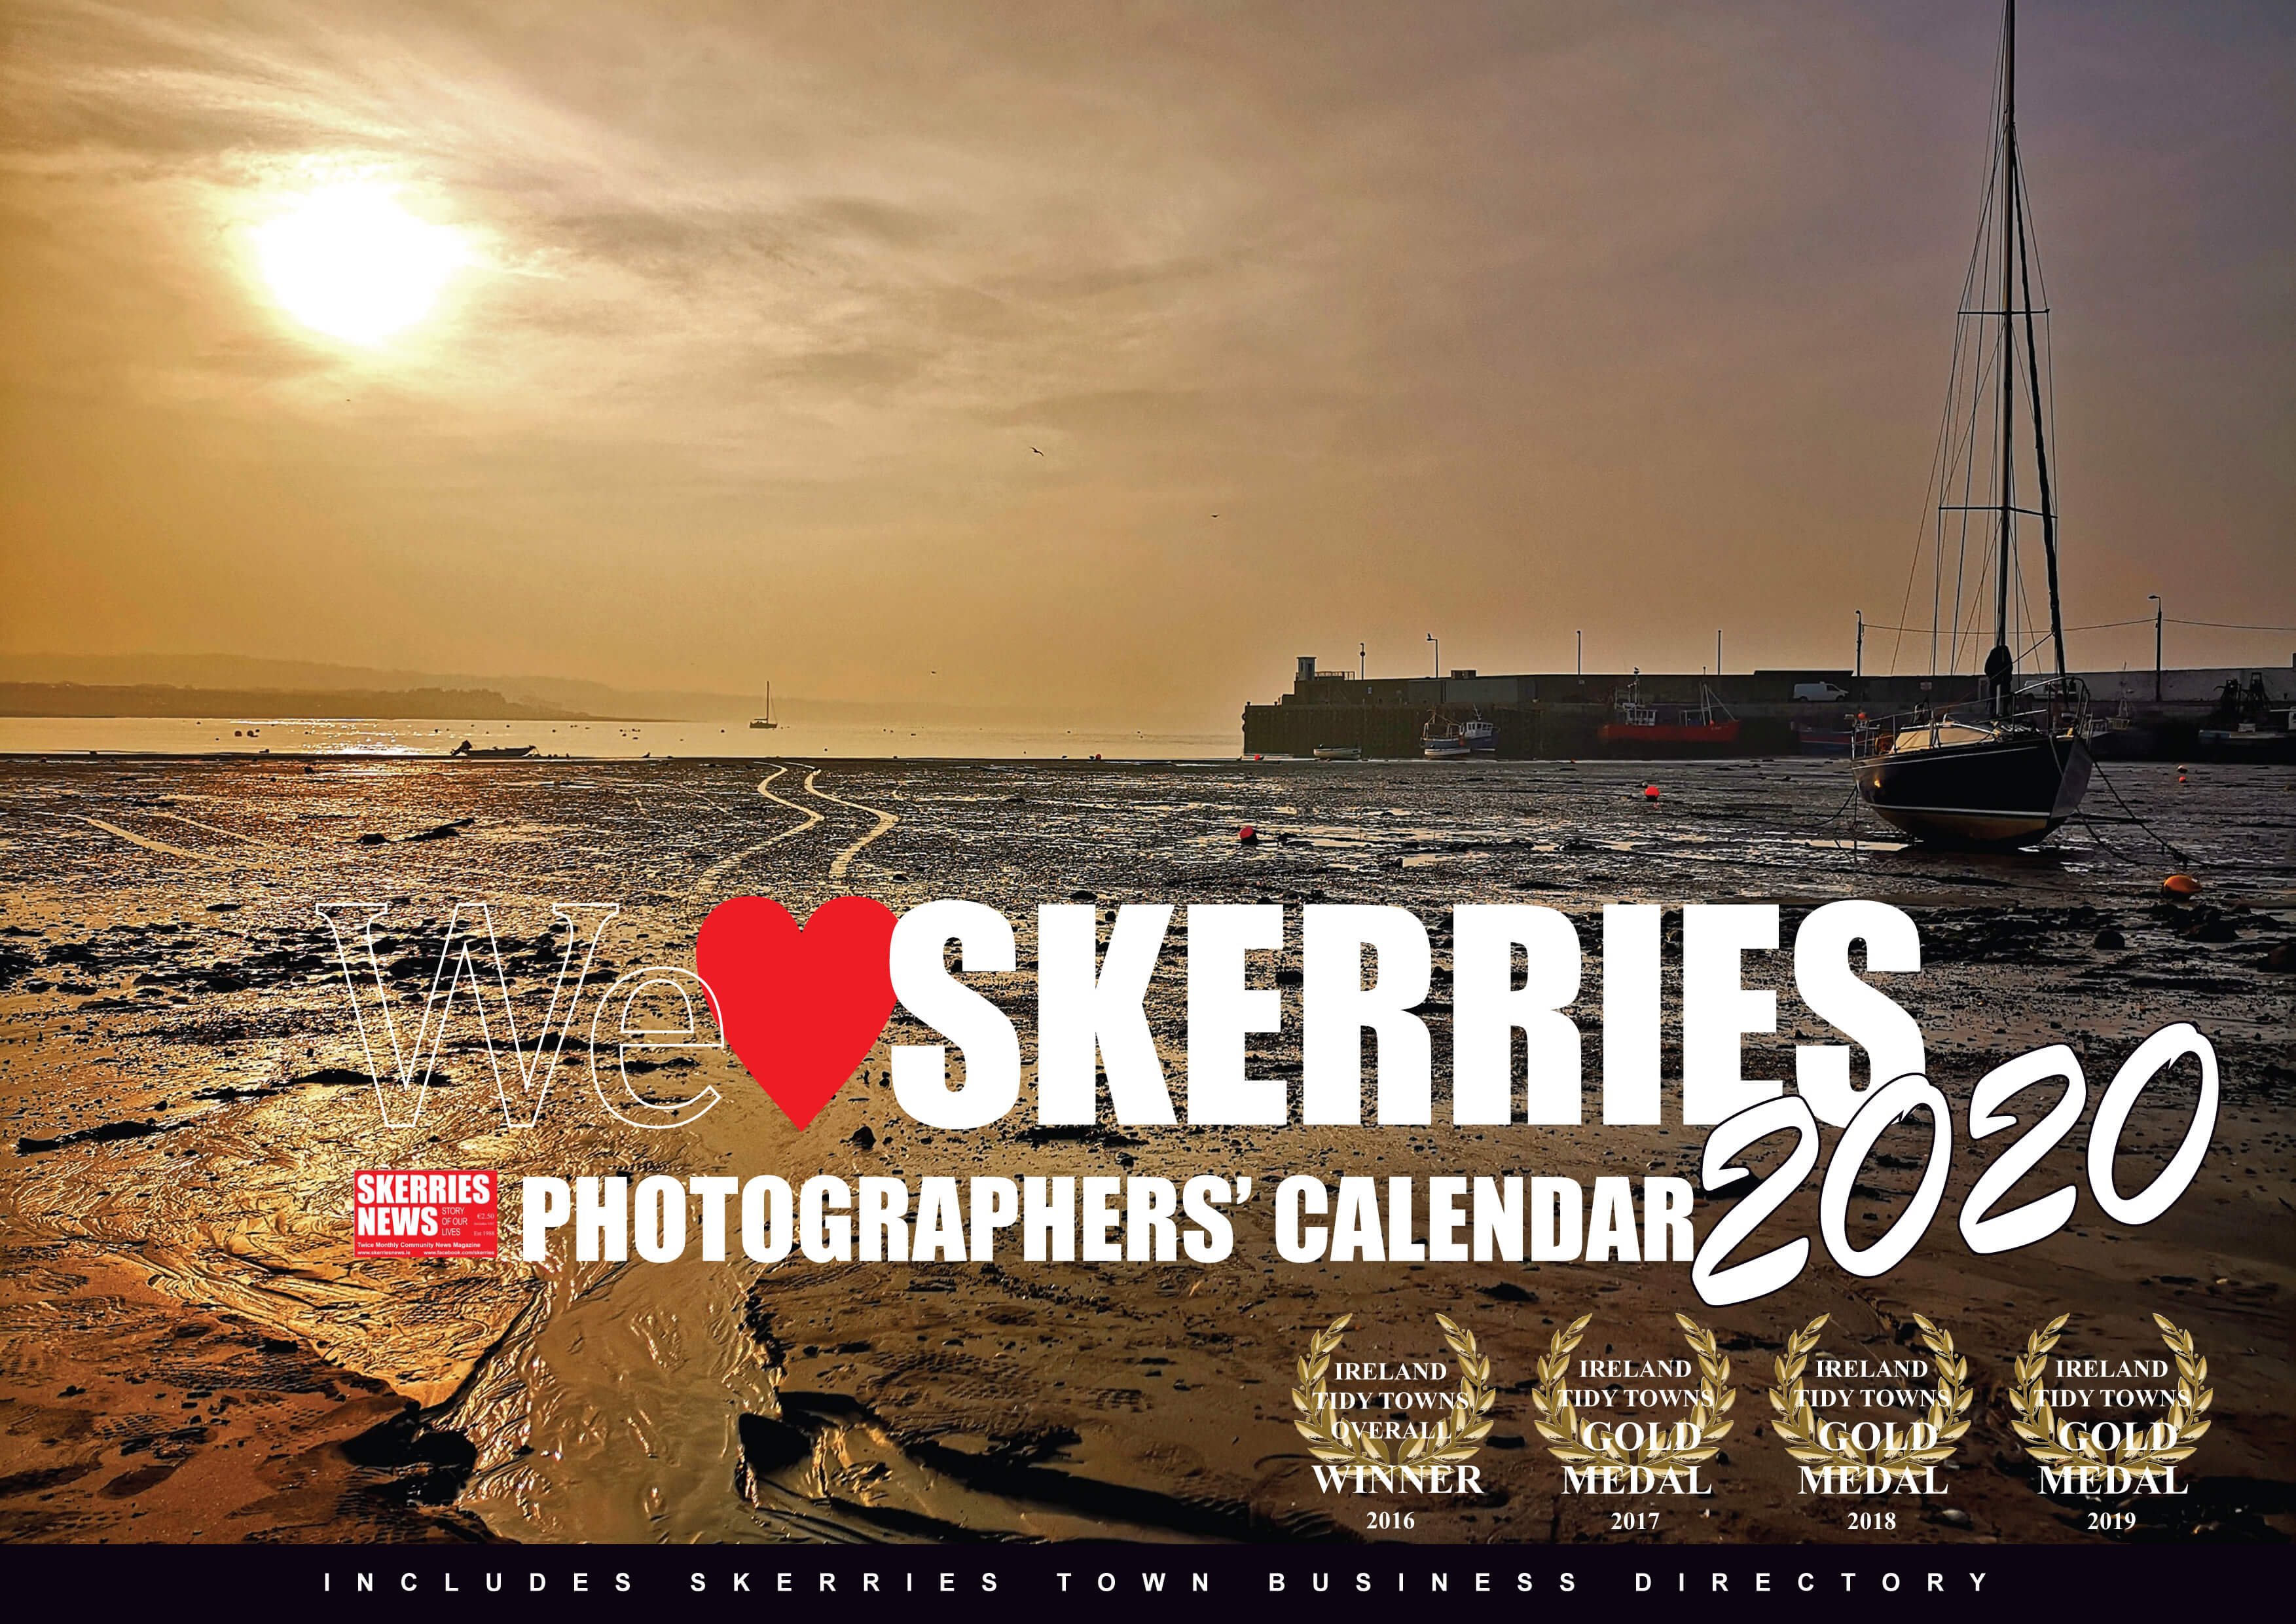 Make a move to Skerries for a prime slice of outdoor life